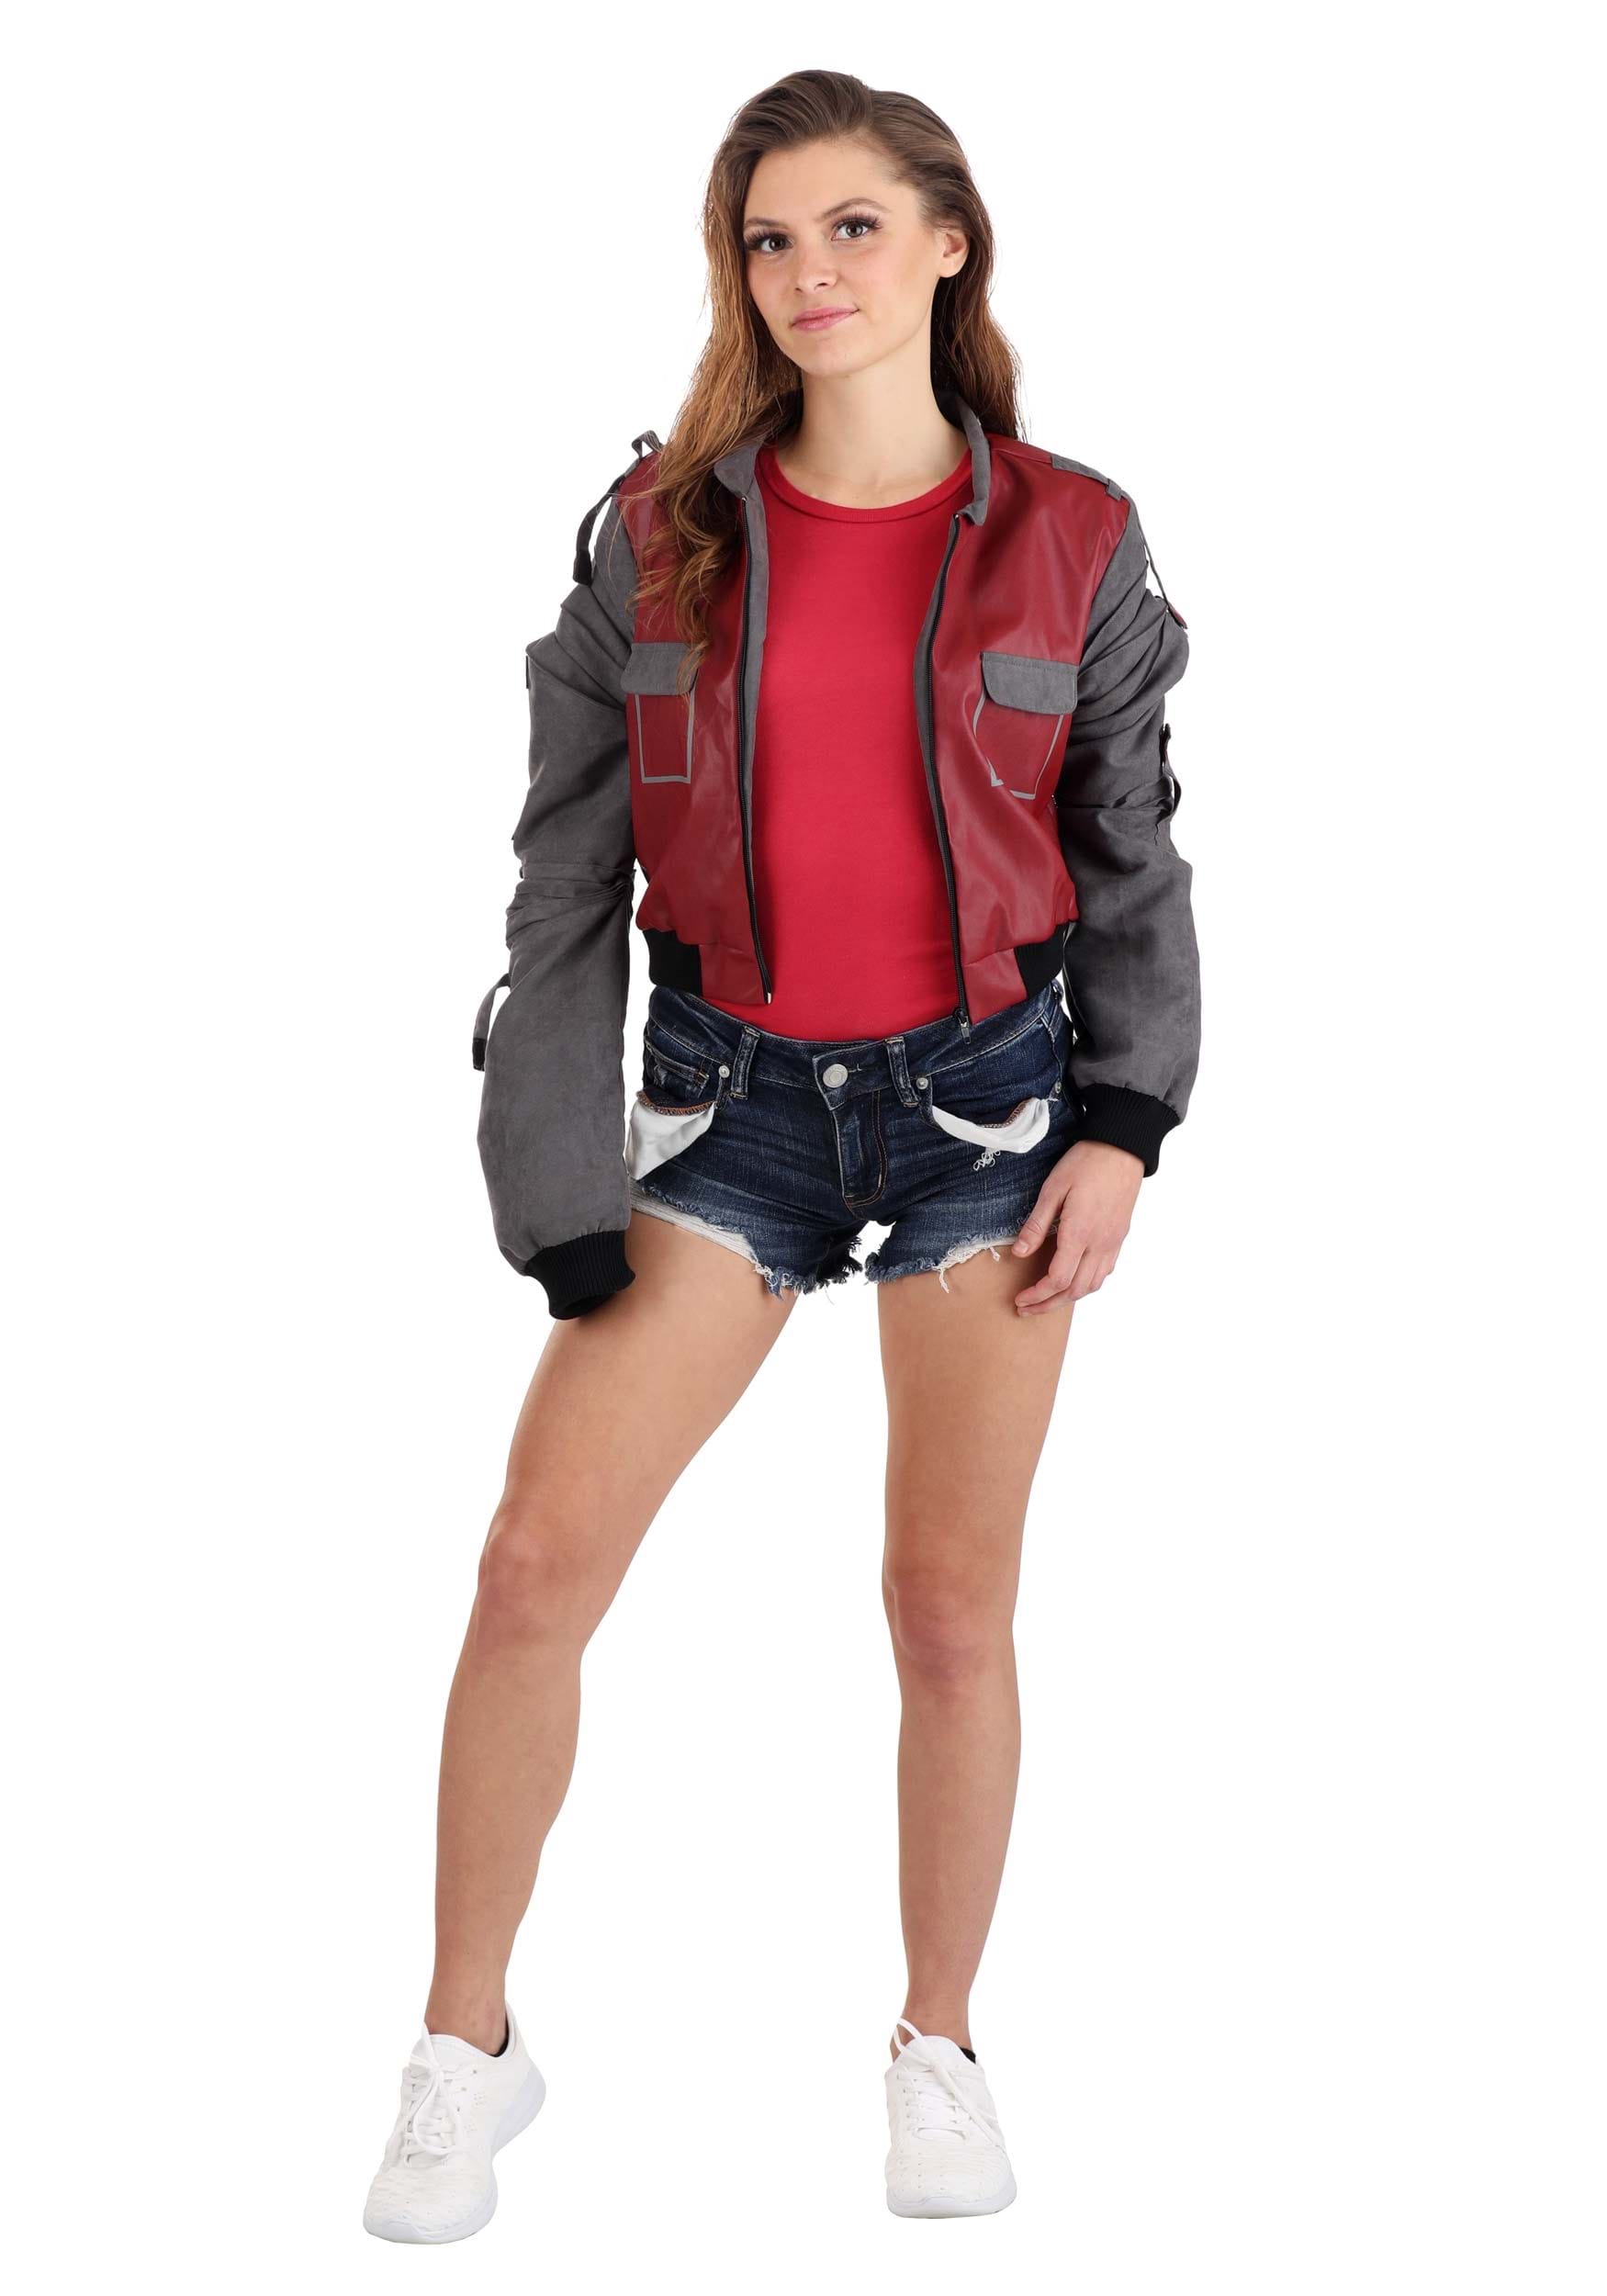 Photos - Fancy Dress FUN Costumes Women's Back to the Future Jacket II Marty Mcfly Costume Red&